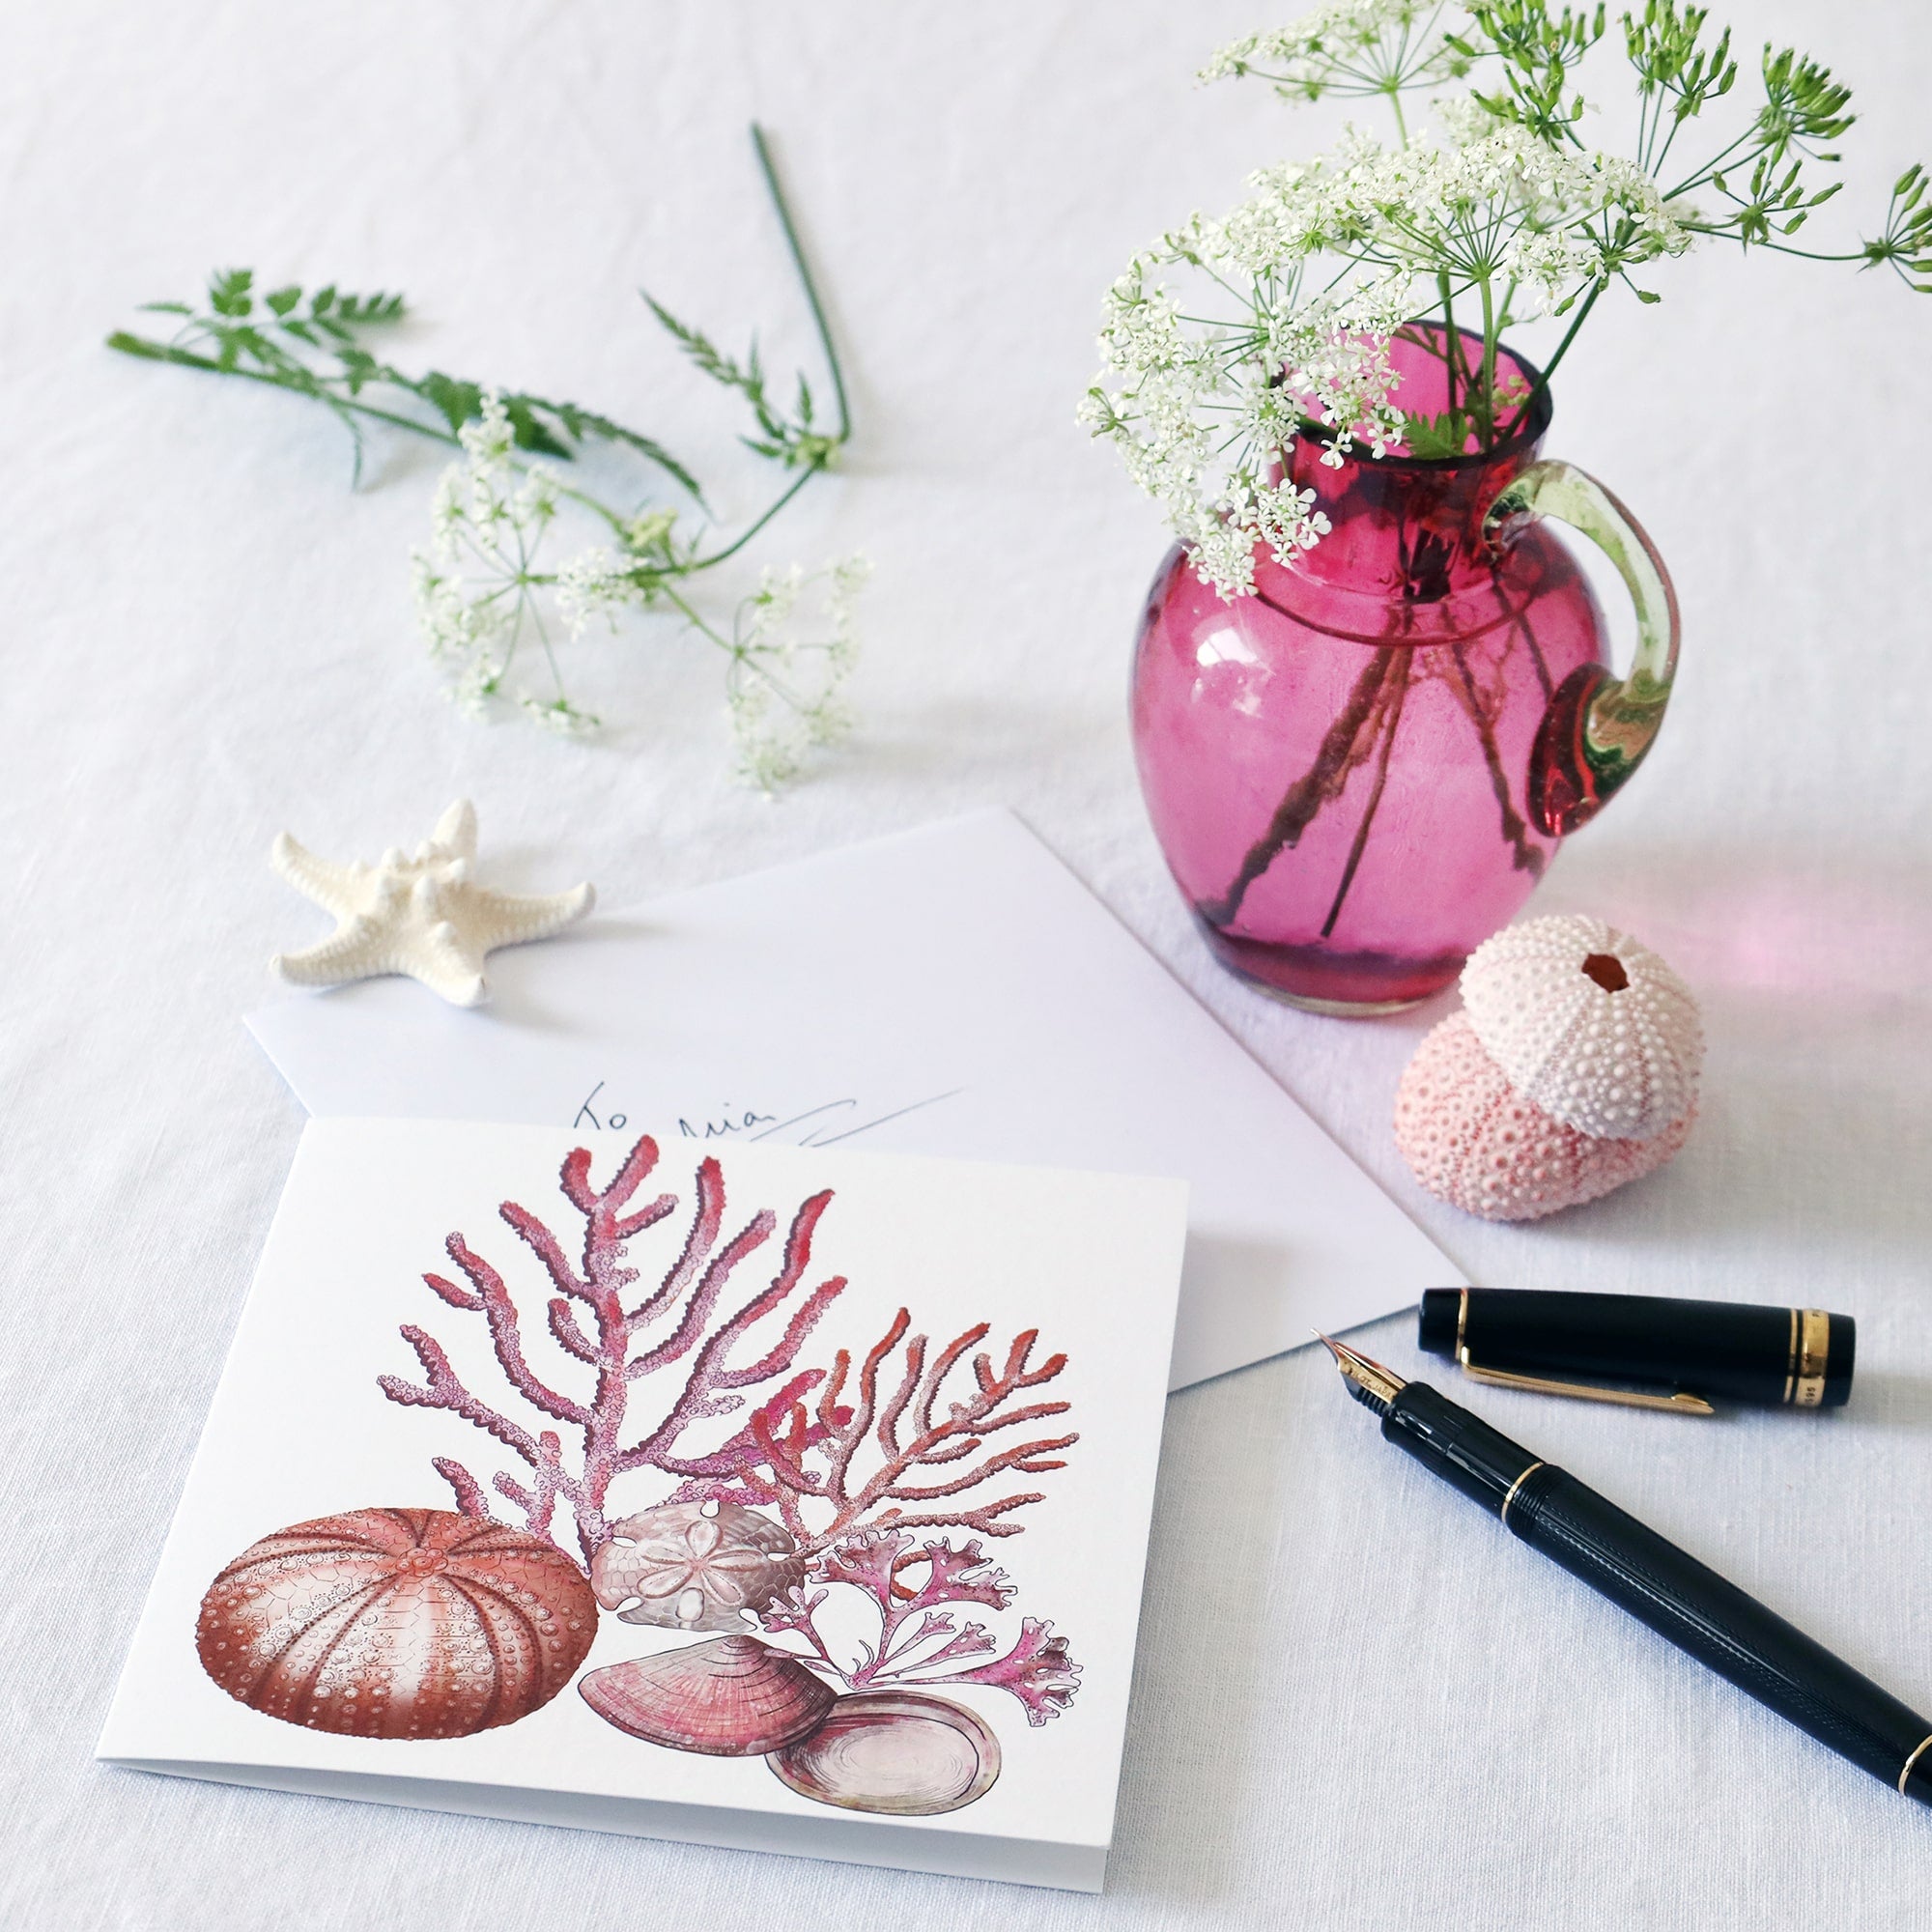 greeting card with illustration of corals, sea urchin, sand dollar and seaweed all in pinks  on a white background lying on a white table cloth with a fountain pen, hand written envelope shells and a small cranberry glass jug with wild flowers in 